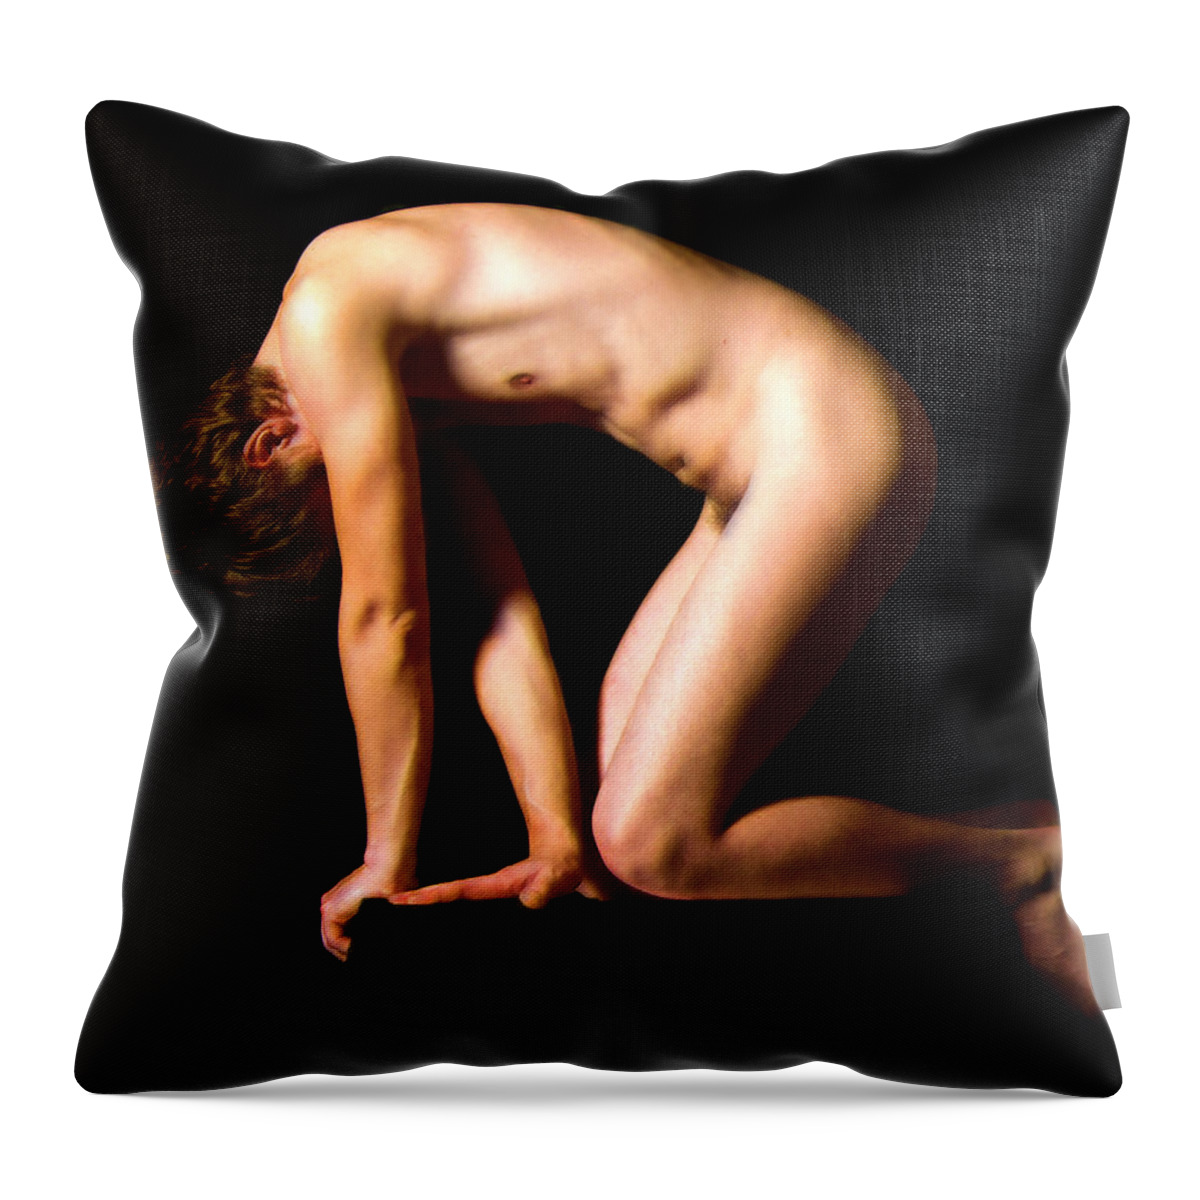 Nude Getting Up Throw Pillow featuring the painting Nude Getting Up by Troy Caperton